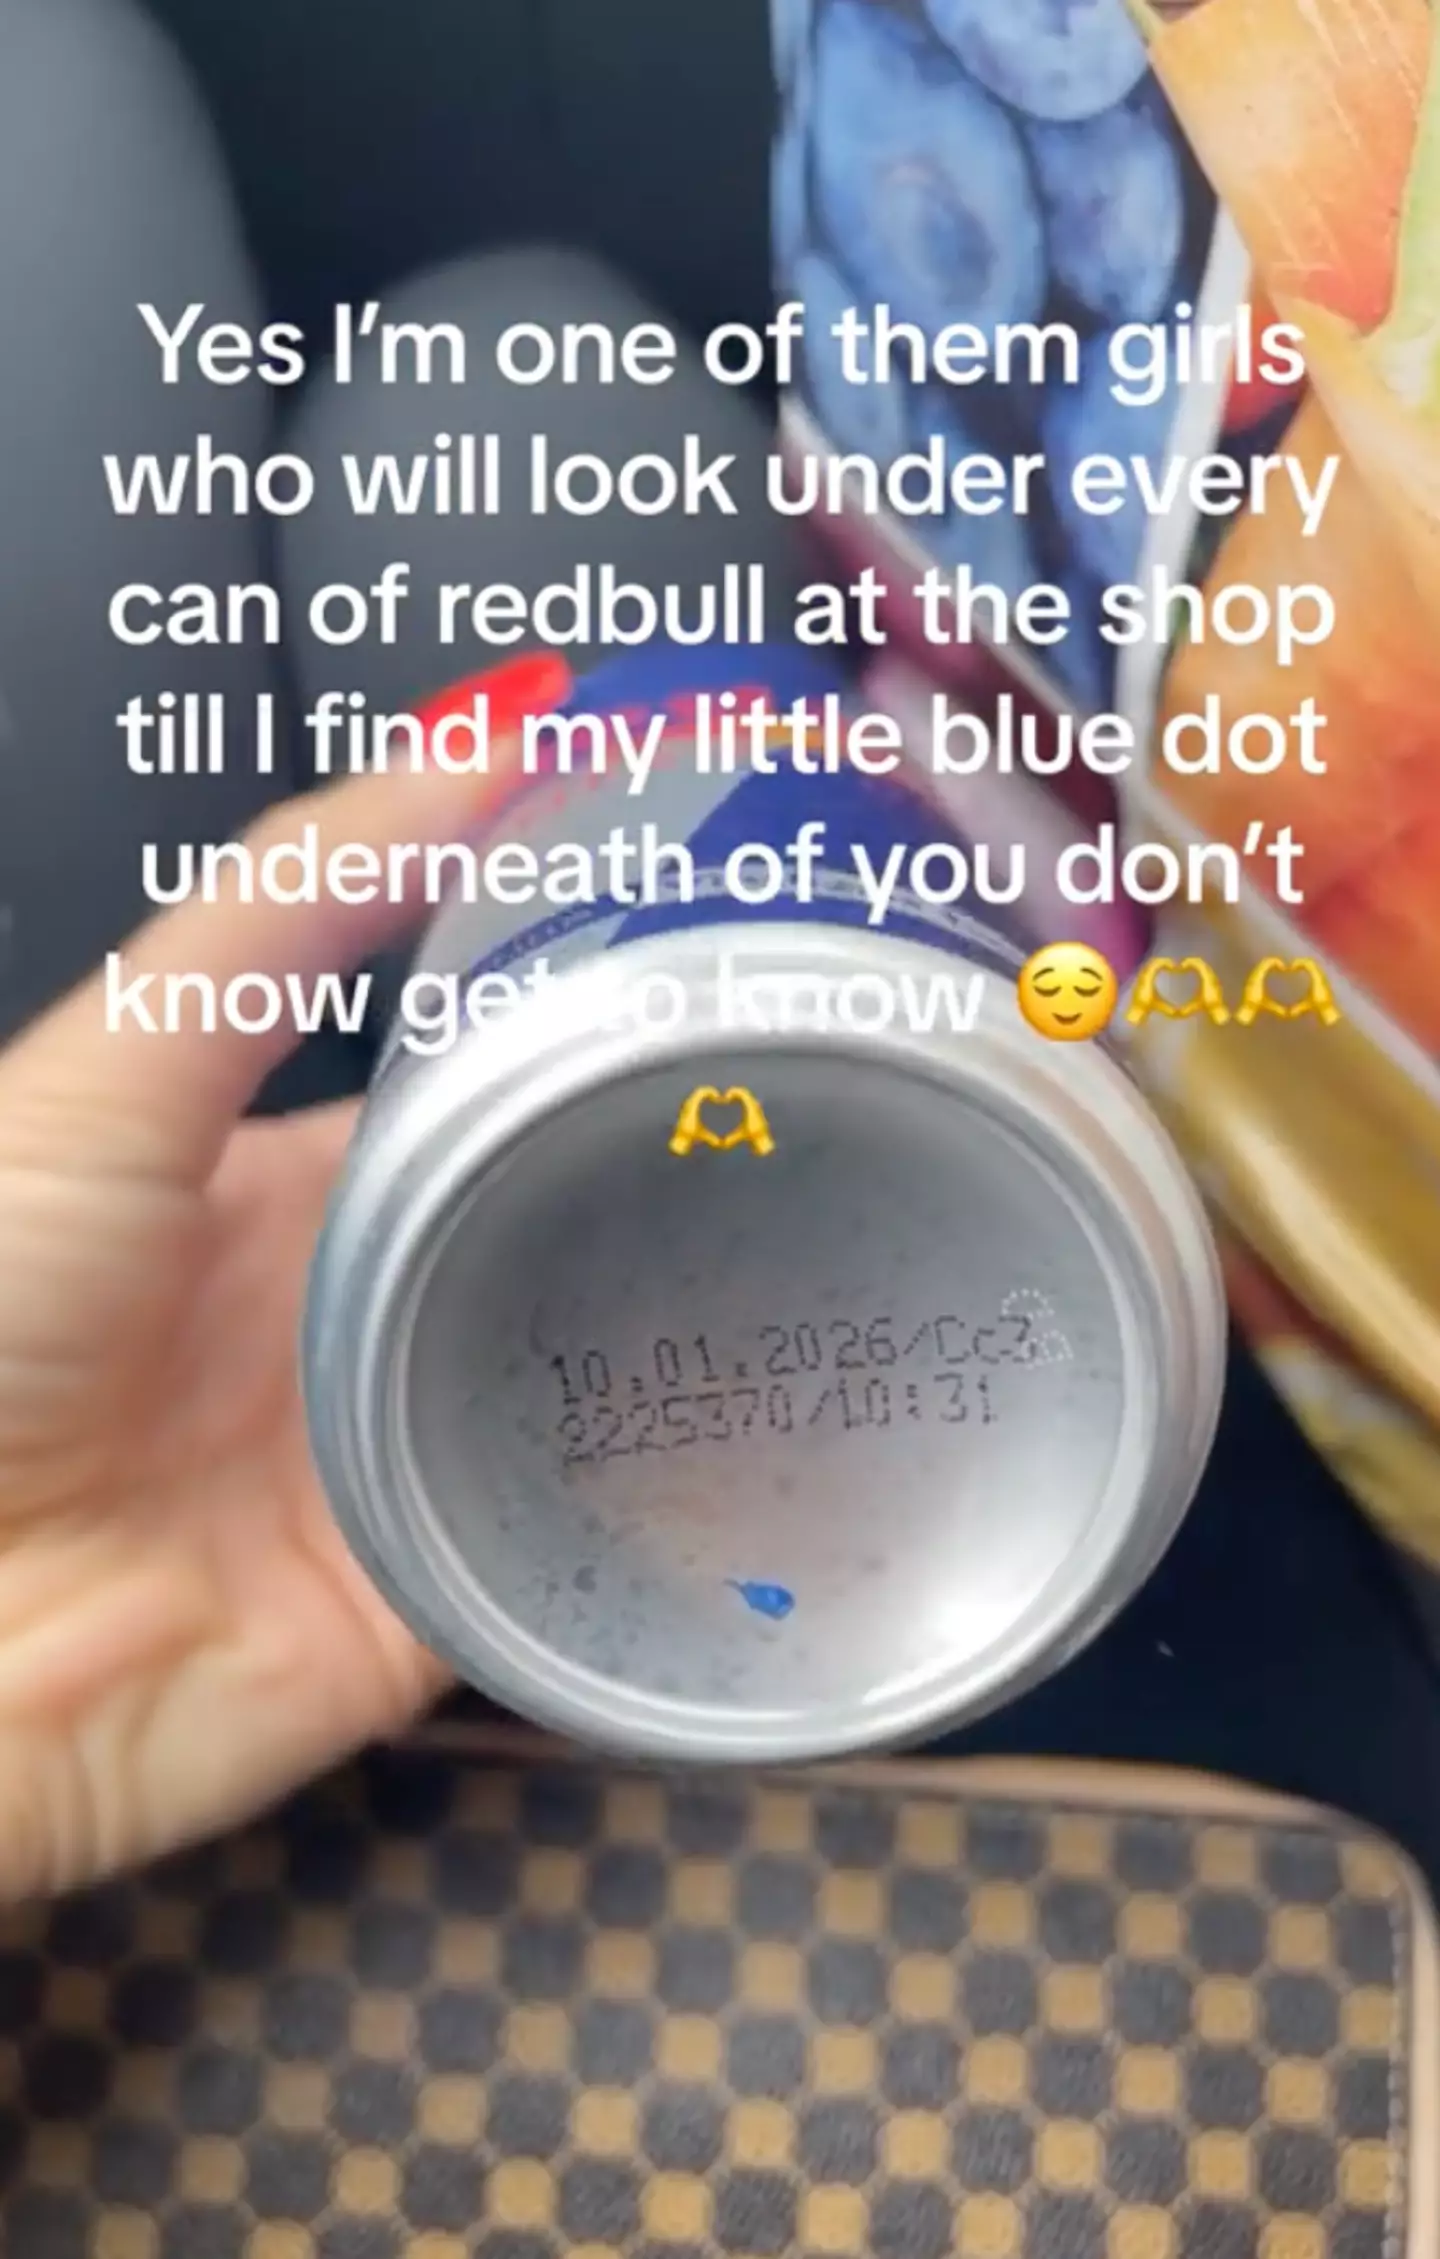 Some Red Bull cans have blue dots on them.